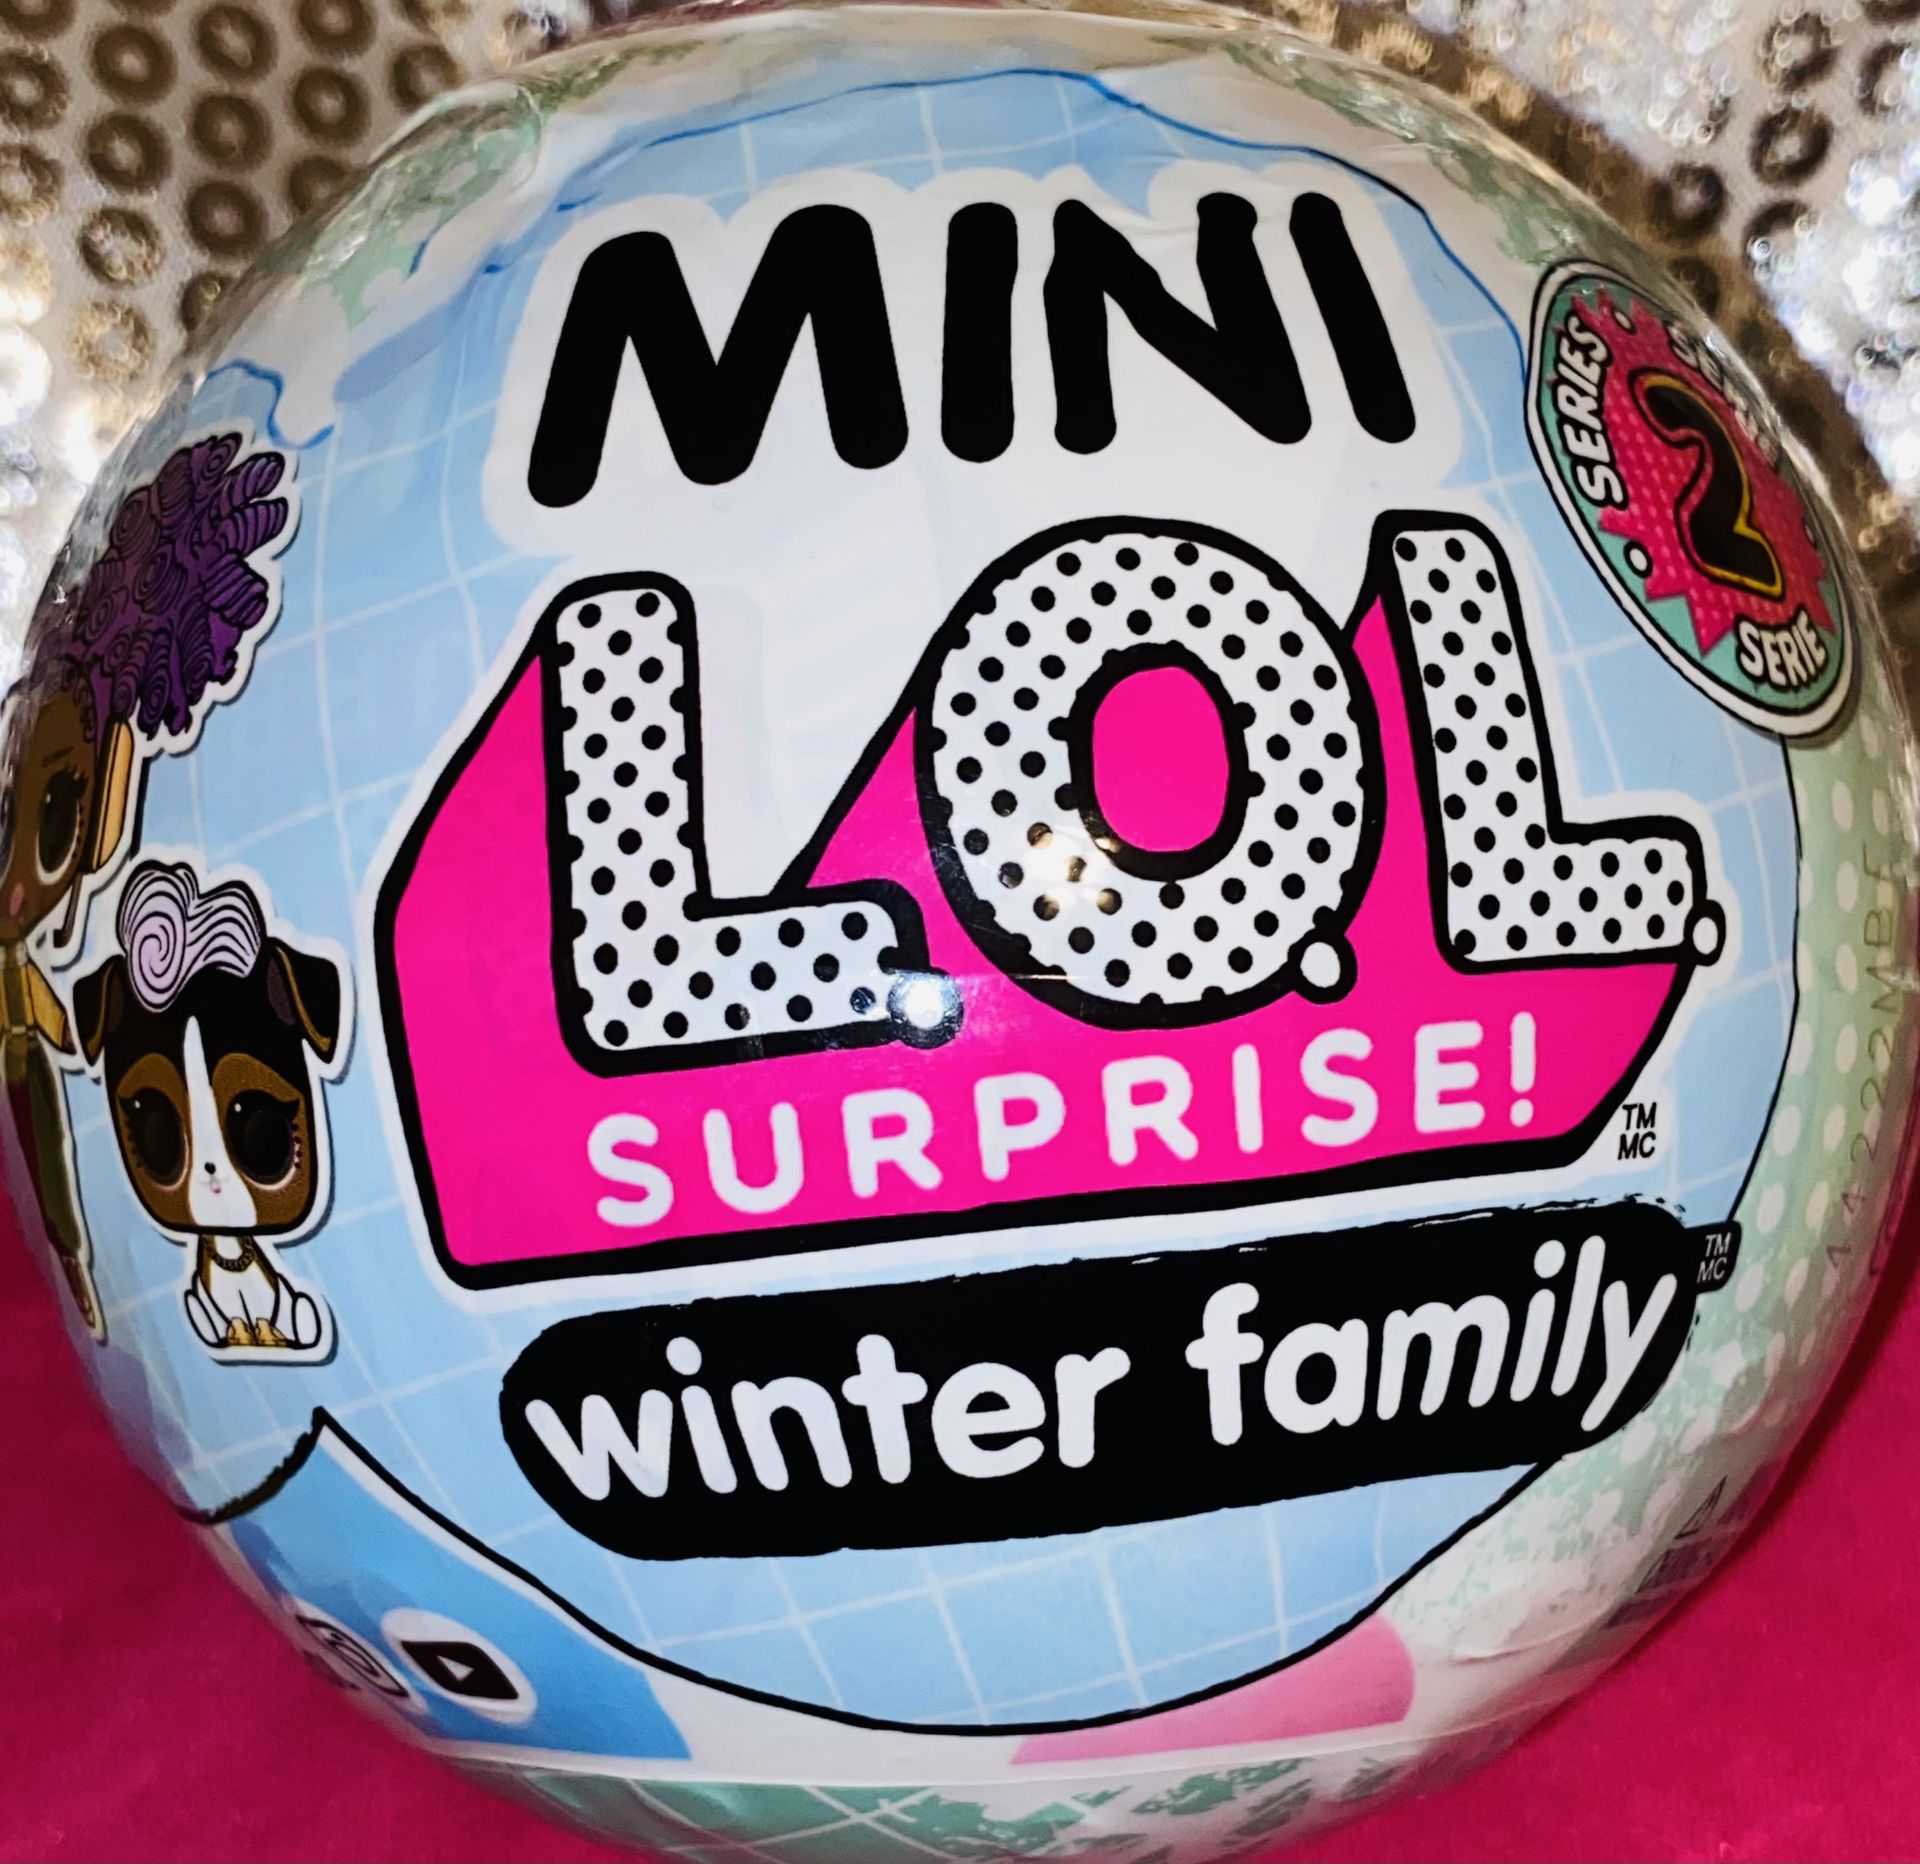 🎀💕❄️🧡☃️🧁✨MINI LOL SURPRISE!™ Winter Family Playset Collection with 8+ Surprises🎀🌷❄️🌈☃️✨